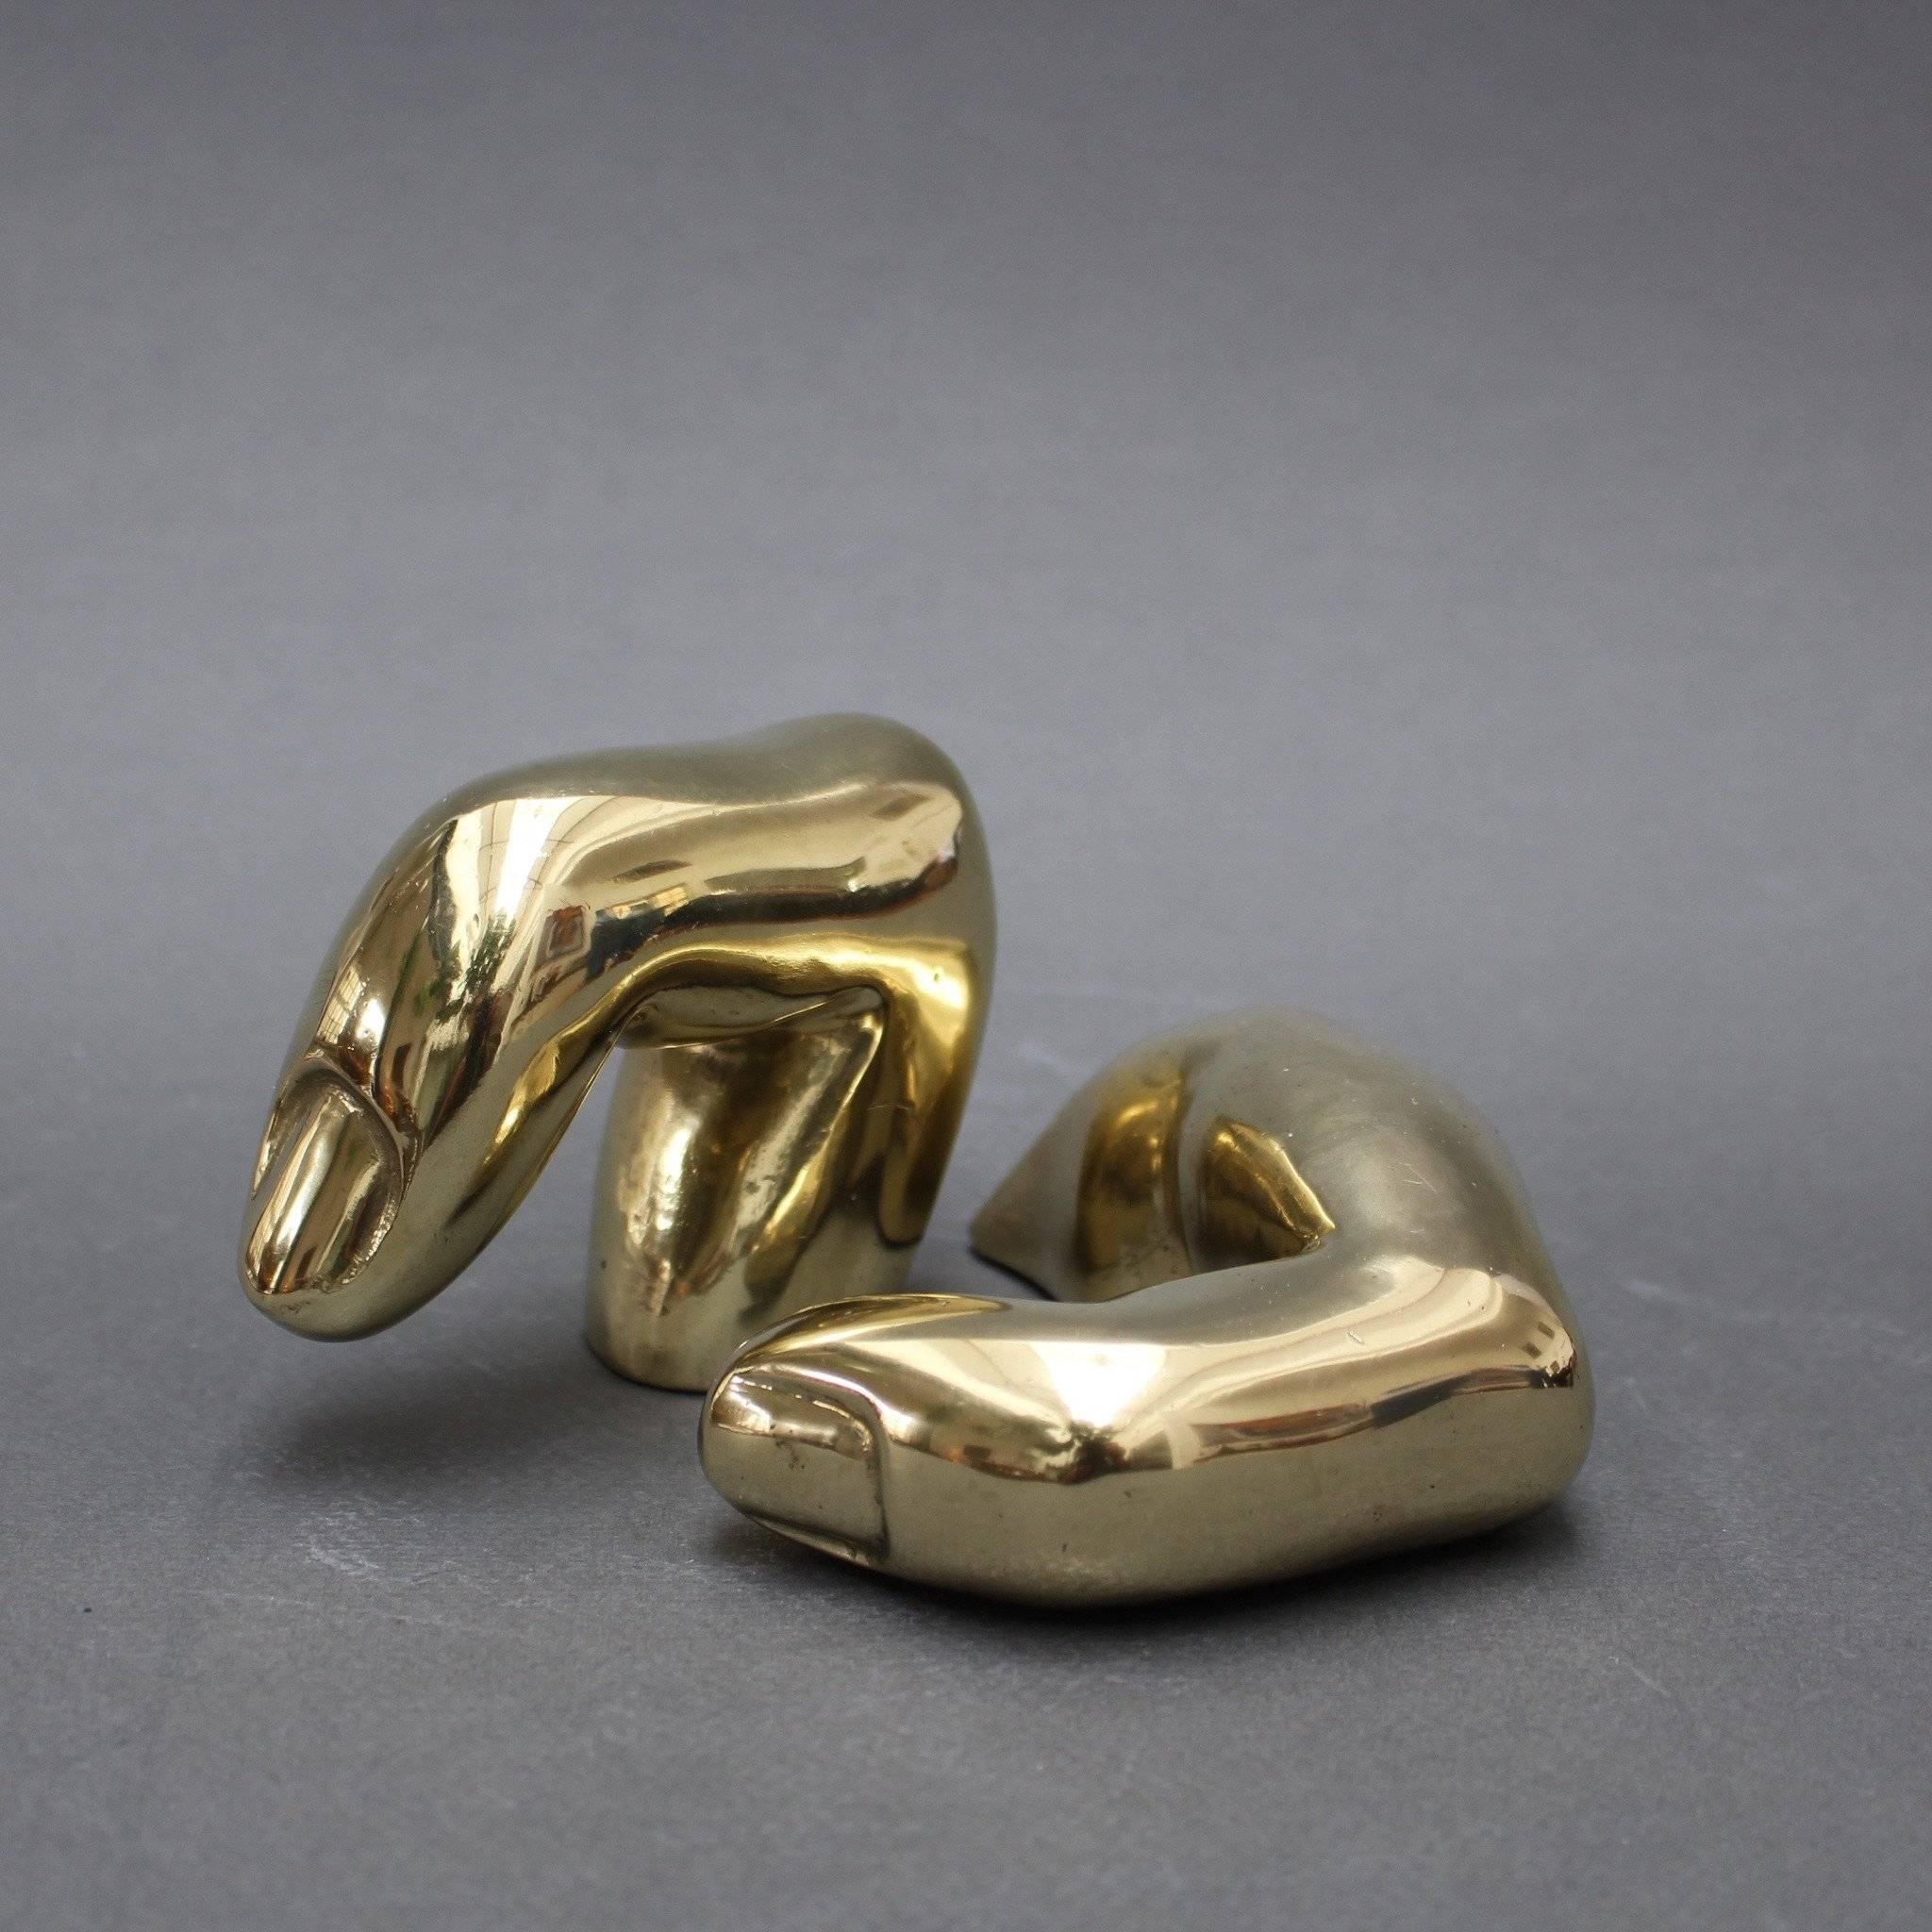 Unique gilt bronze decorative fingers by award winning artist Pietrina Checcacci (1941 -    ). Checcacci was born in Taranto, Italy but moved to Rio de Janeiro when she was 13 years old. Although her art comes in many forms, these distinctive pieces